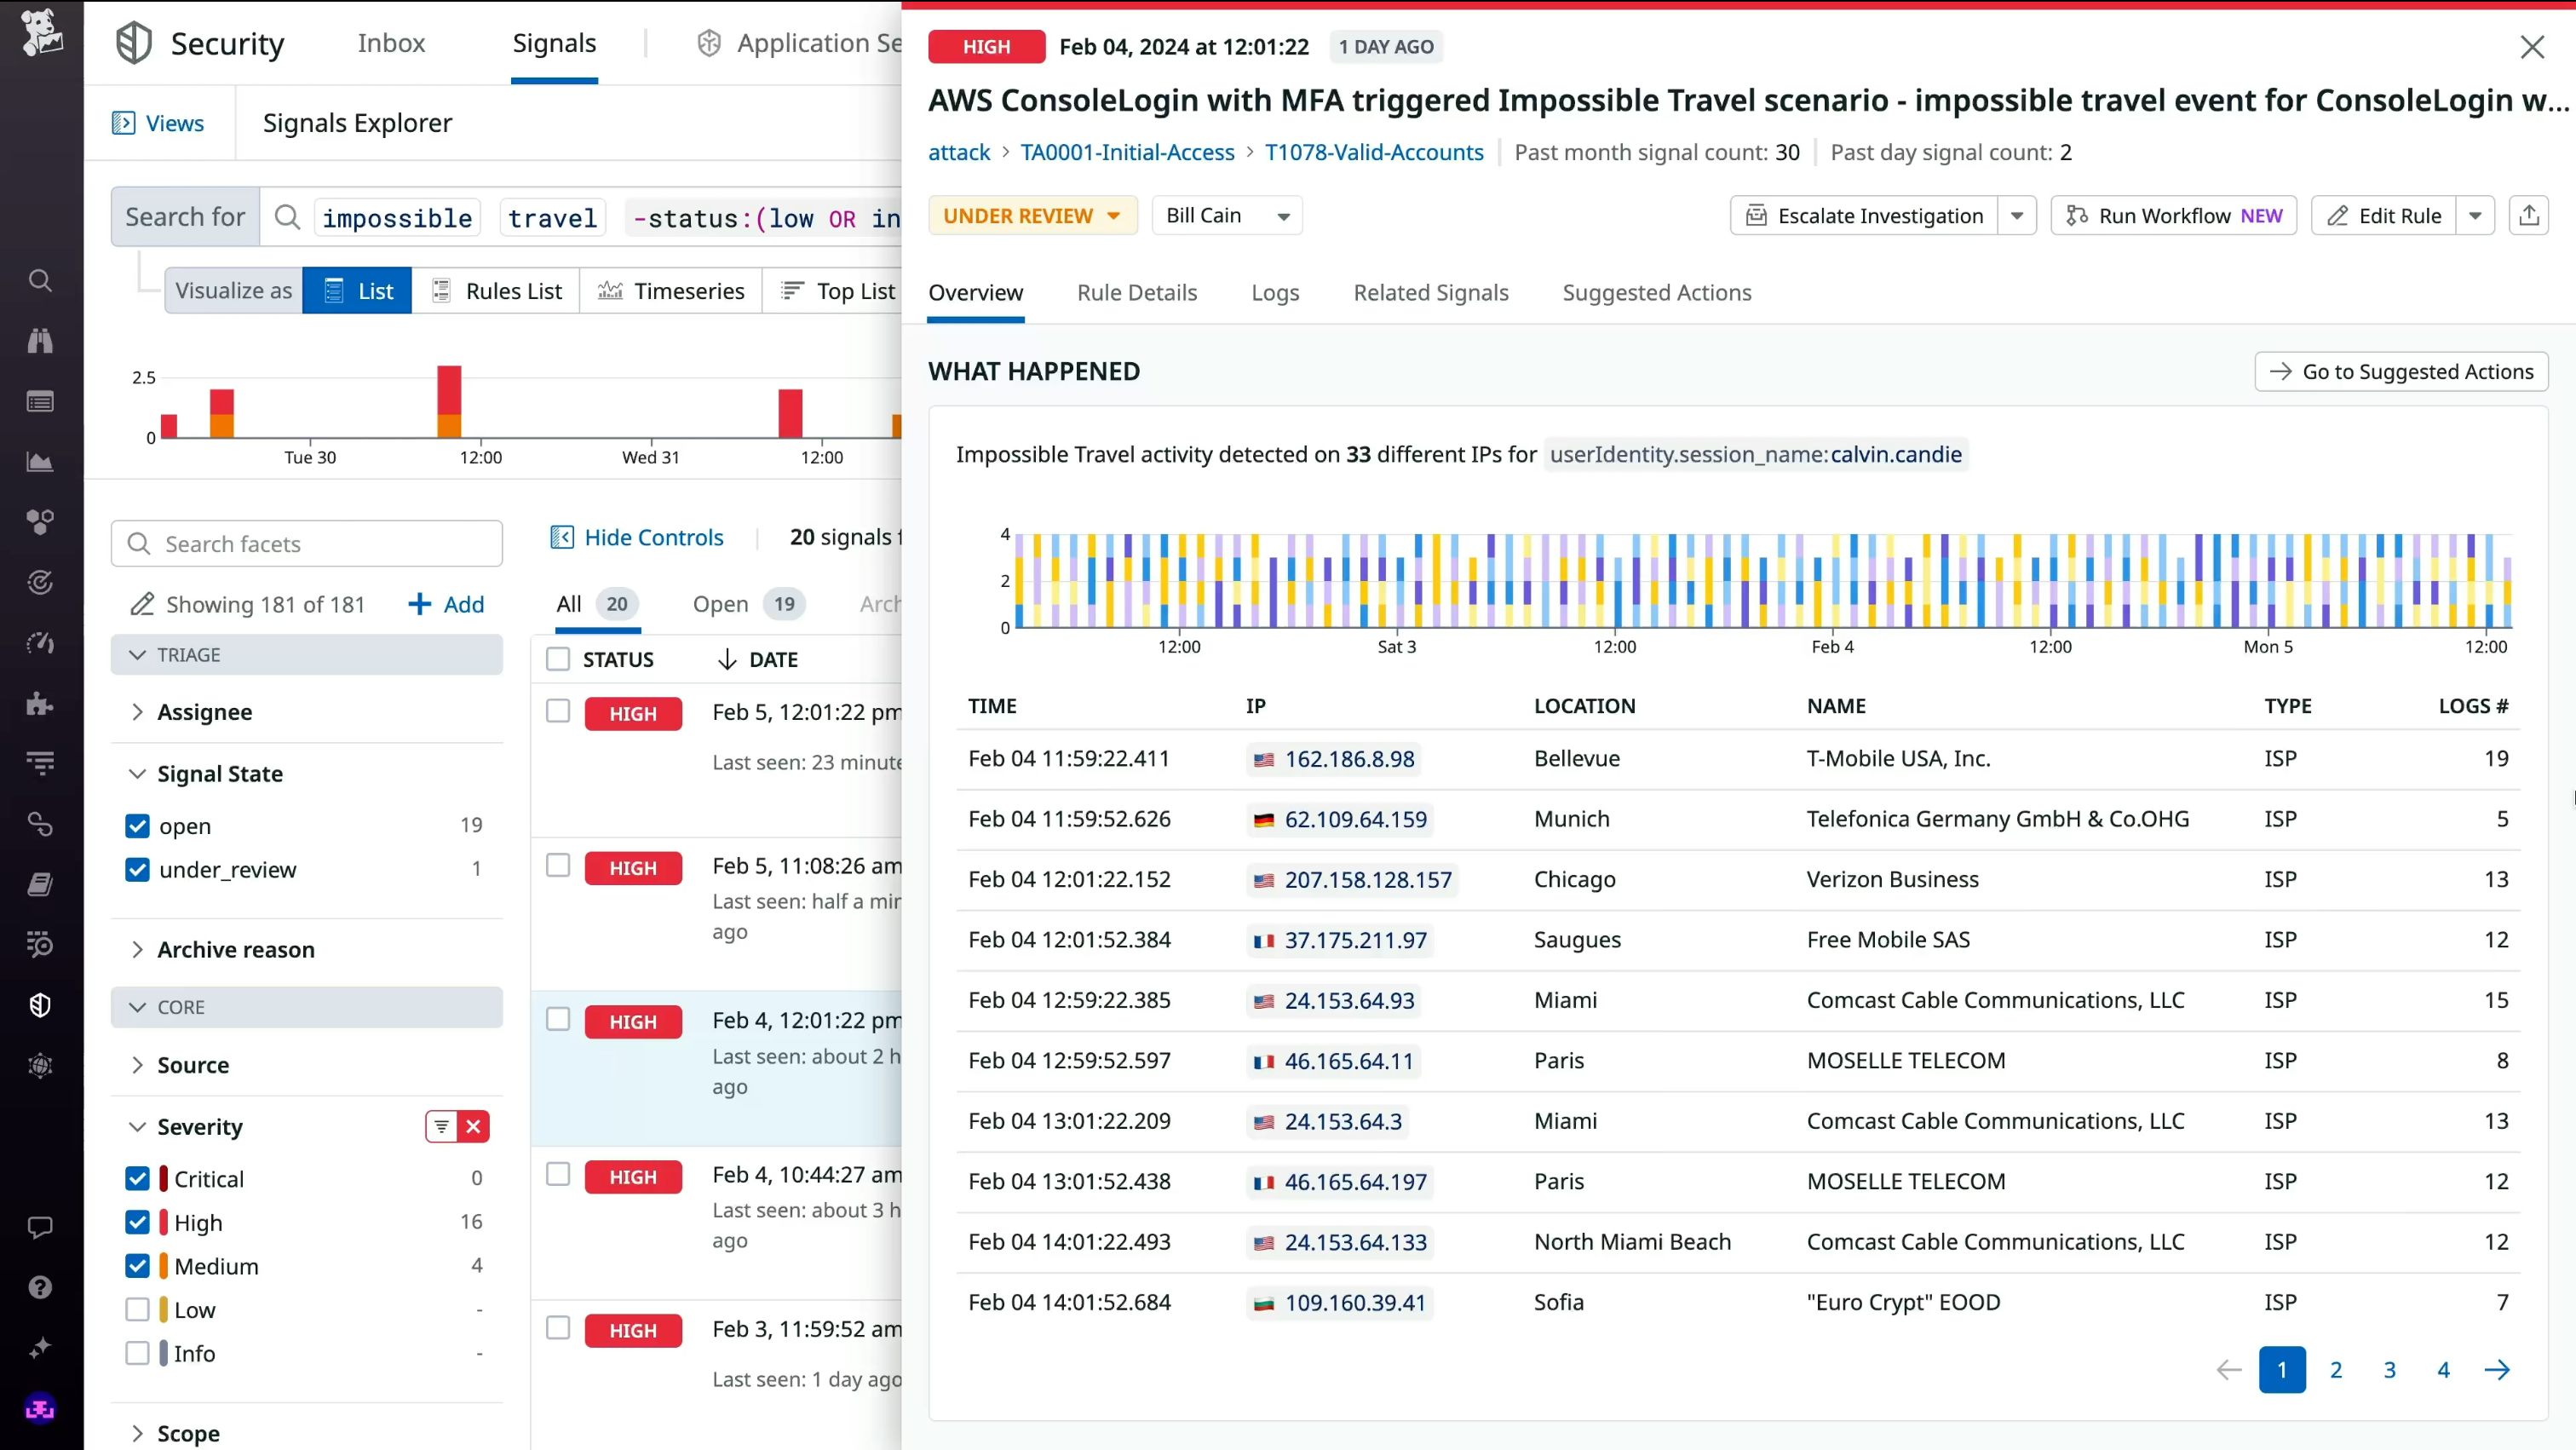 Visualize security insights from your logs